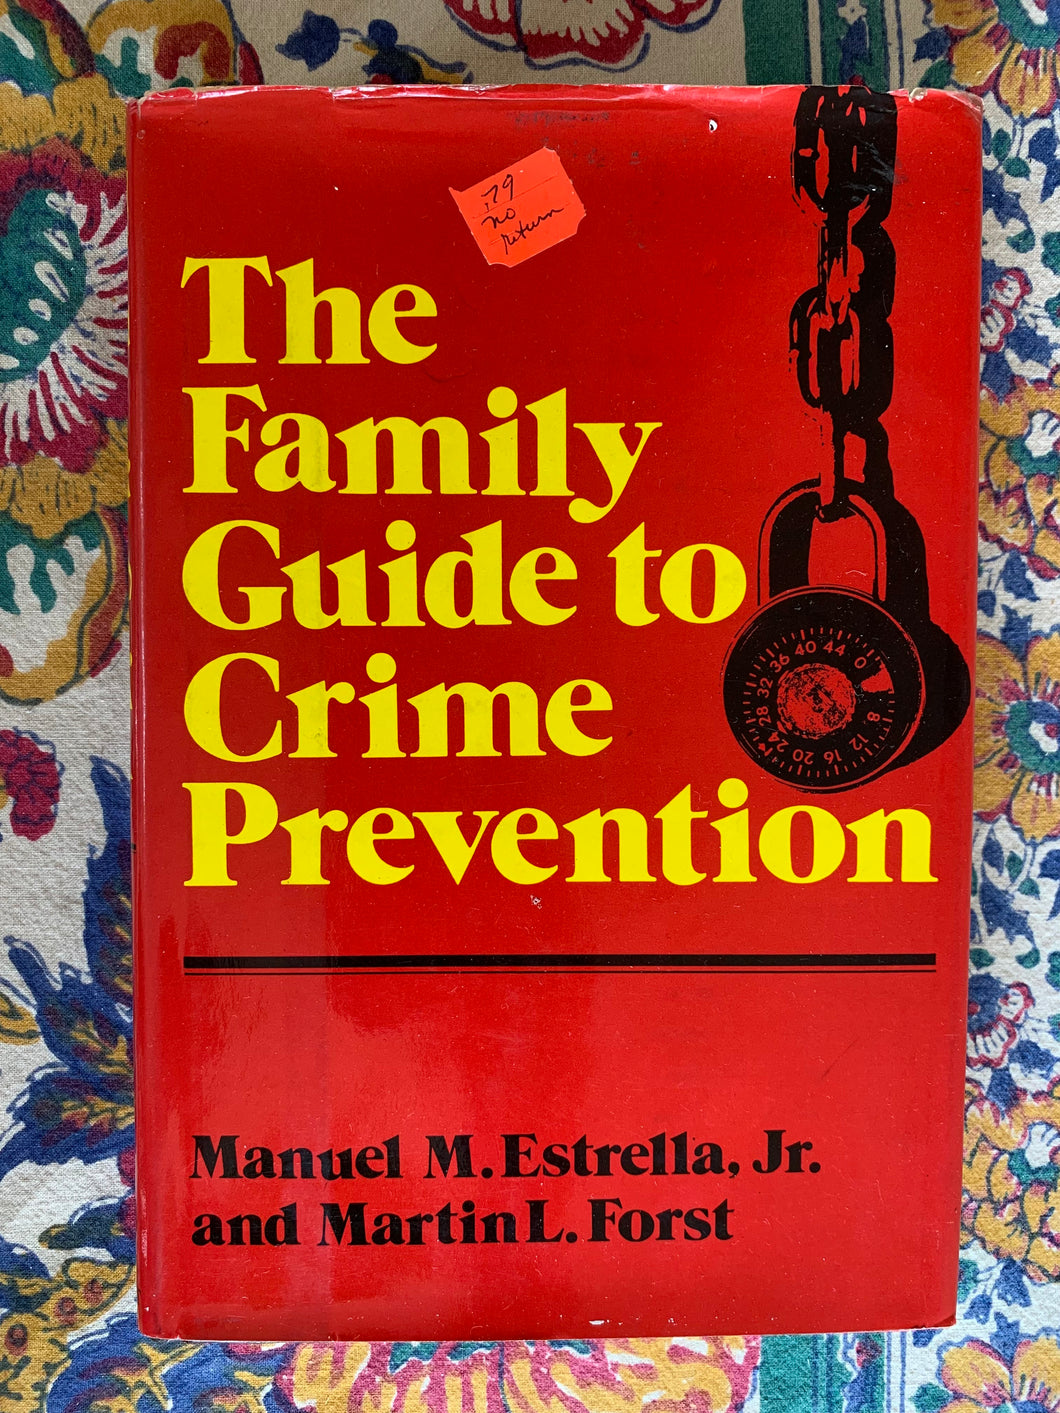 The Family Guide to Crime Prevention